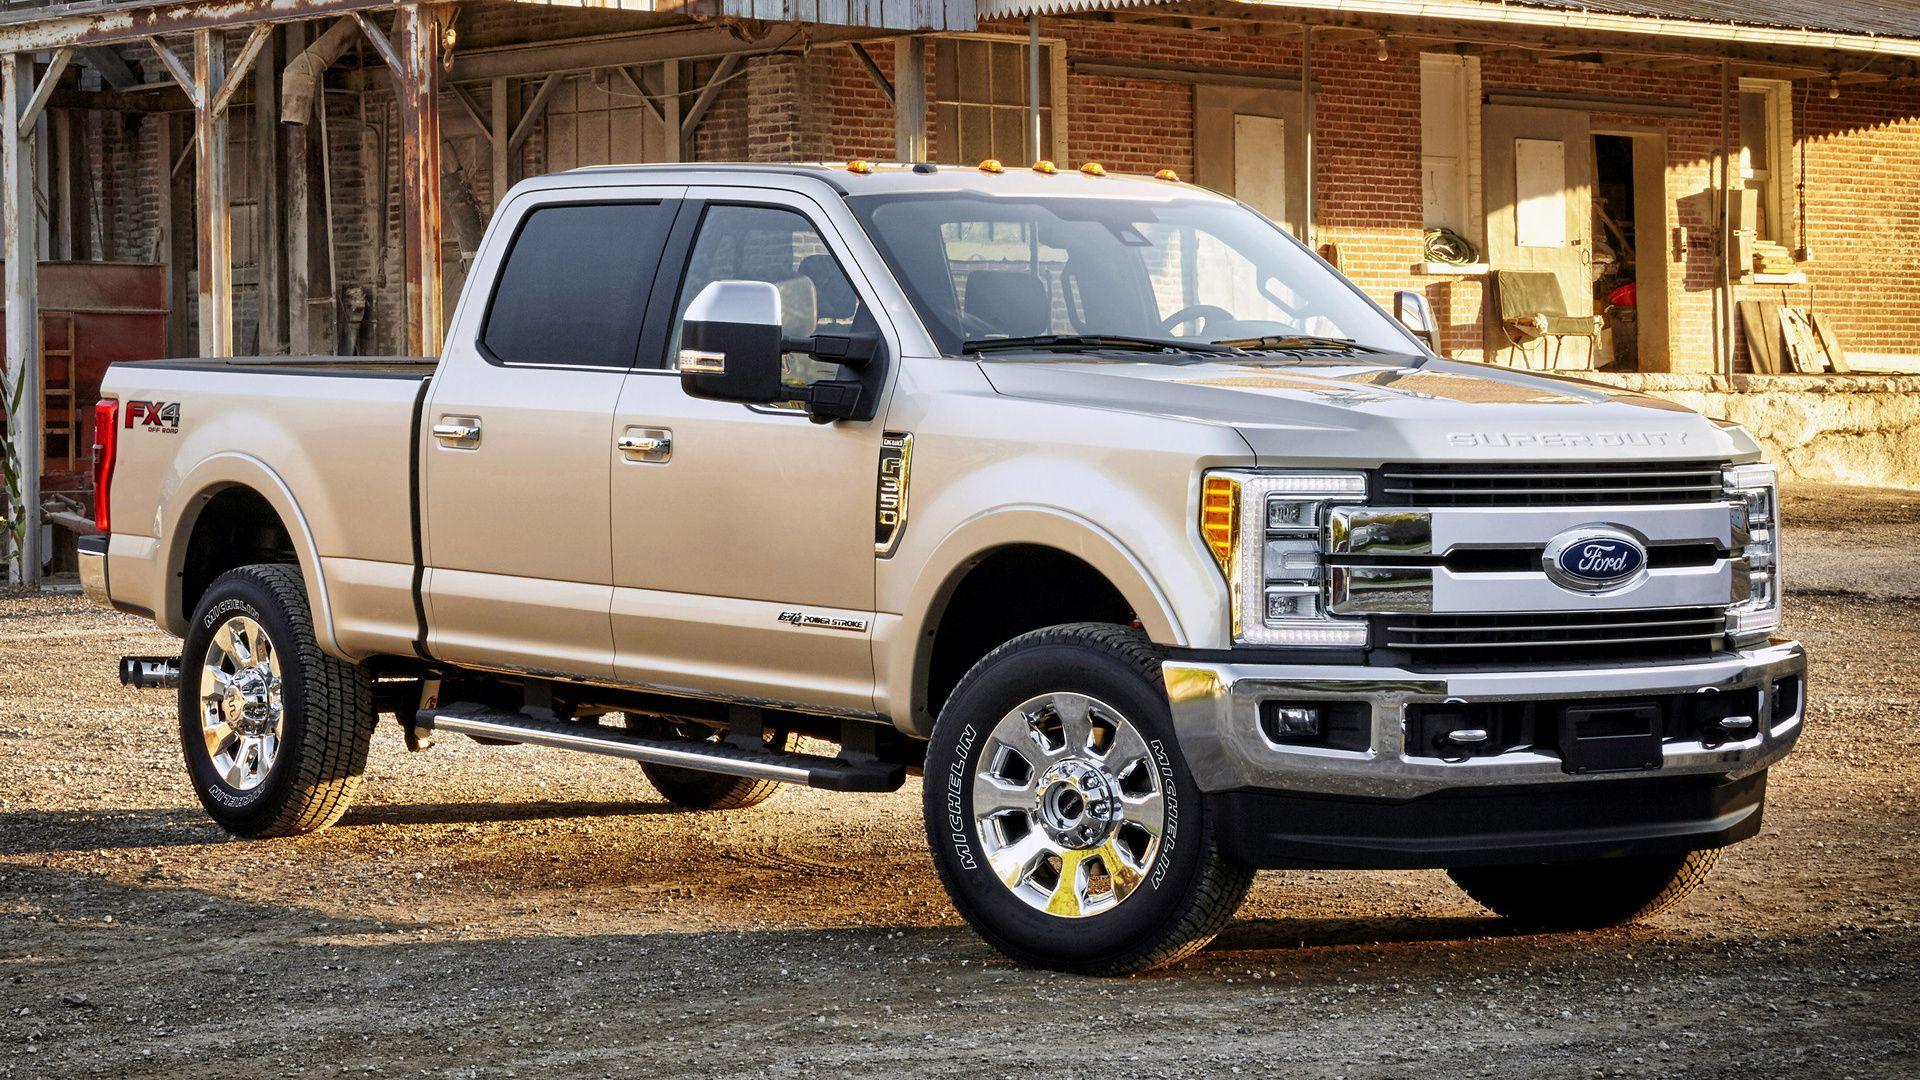 Wallpaper Blink of Ford Super Duty Wallpaper HD for Android